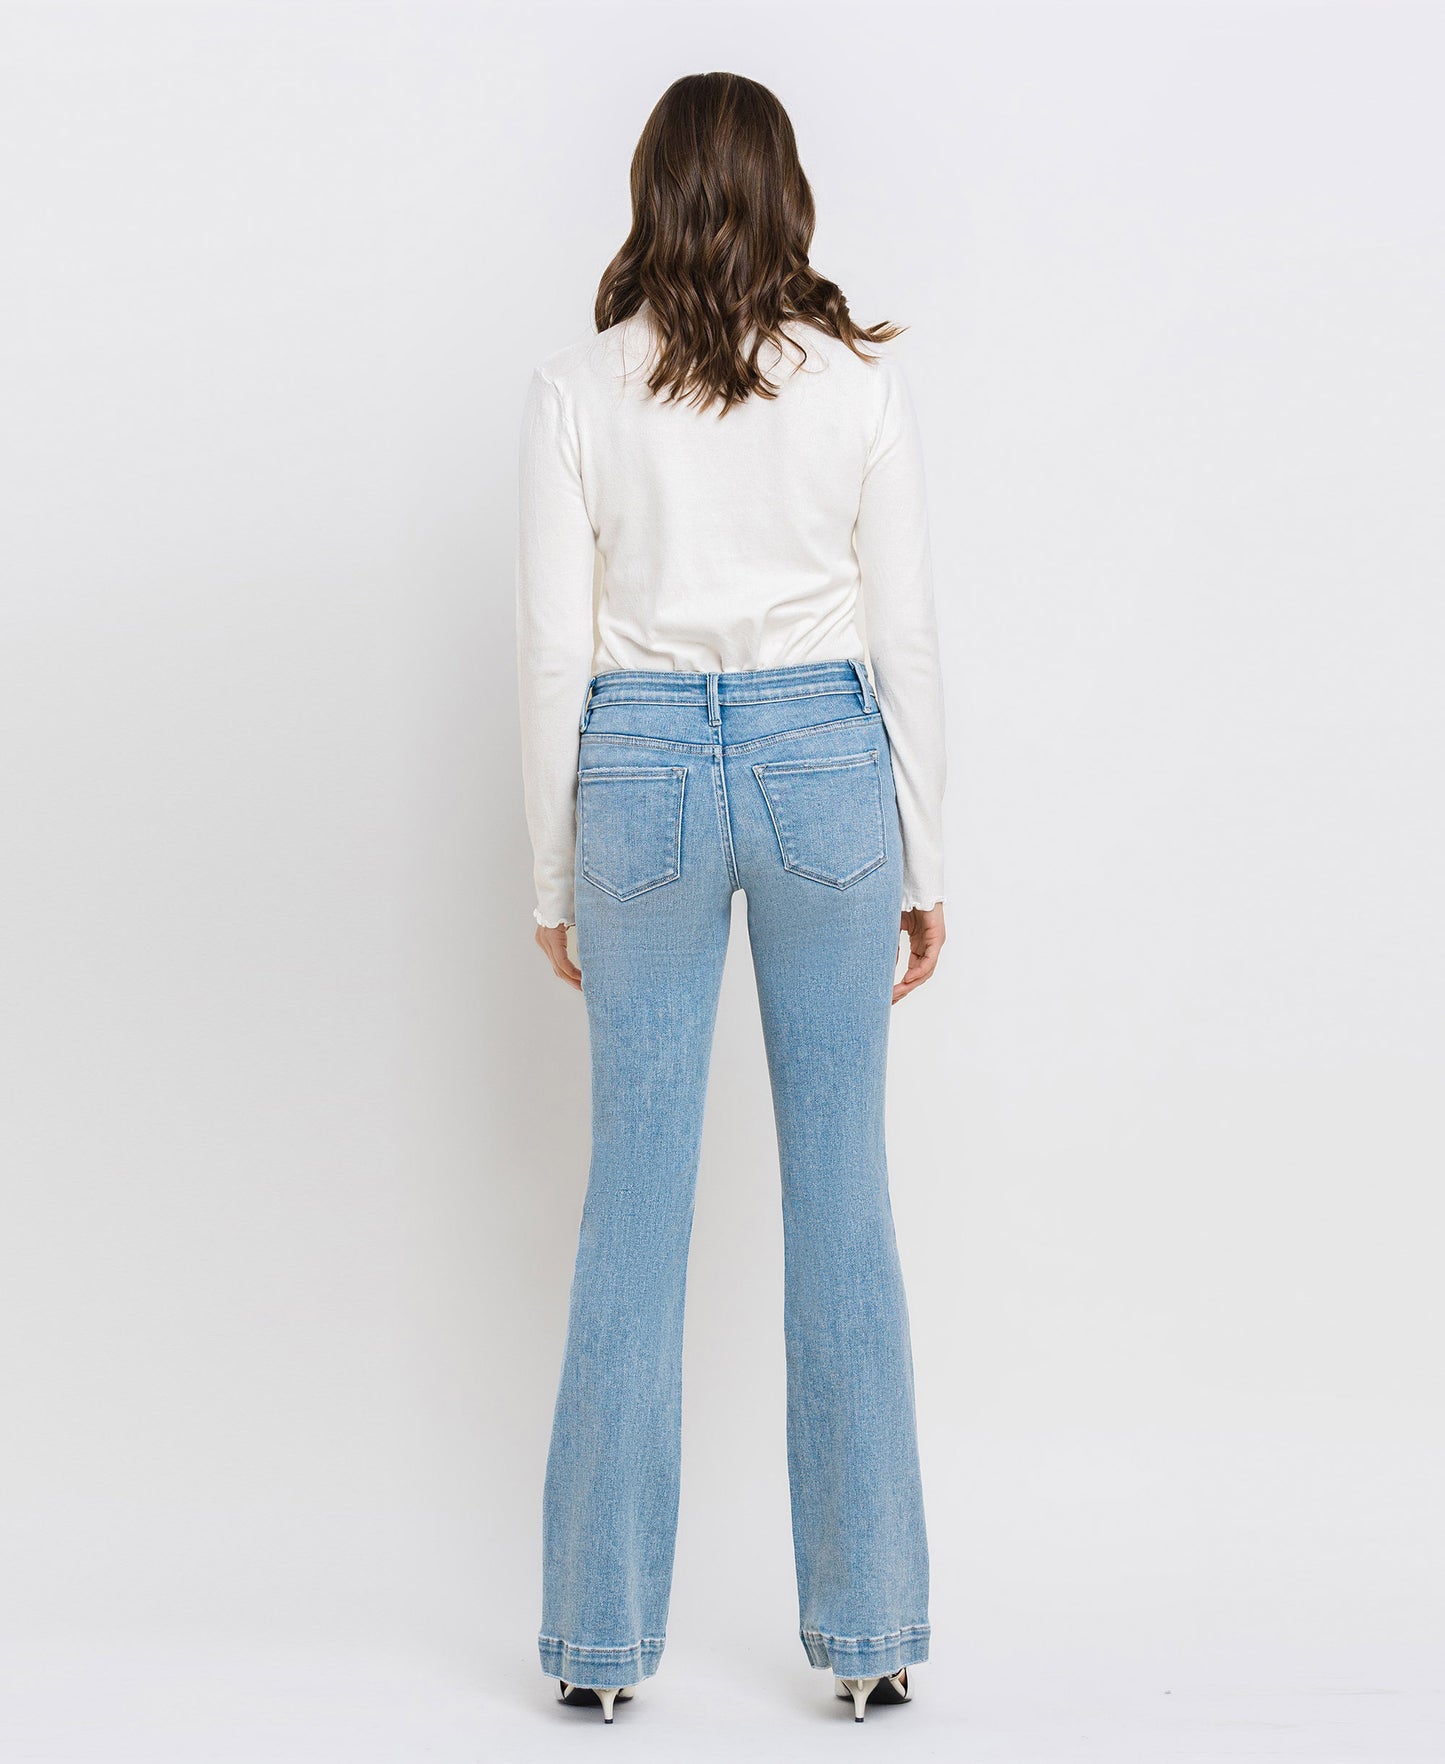 Back product images of Lengendary - Mid Rise Bootcut Jeans